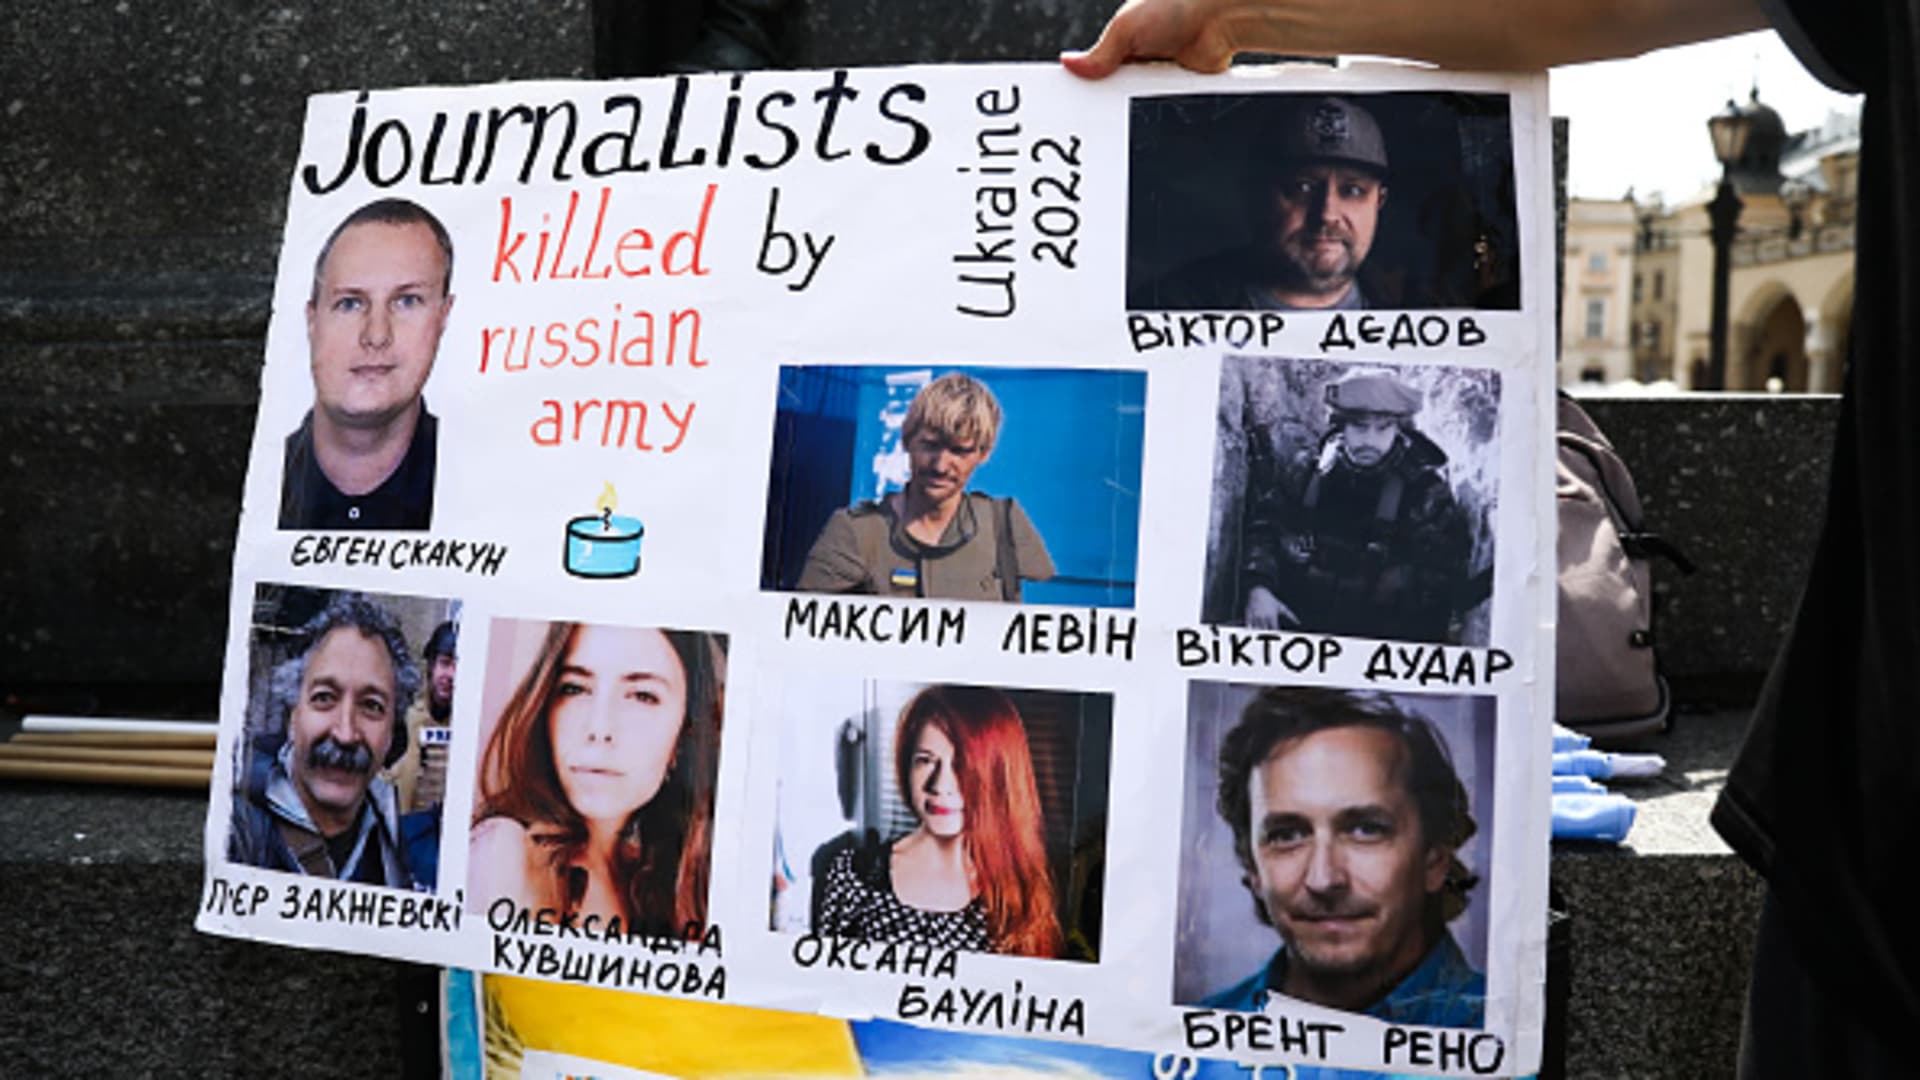 A poster with journalists killed during the Russian invasion on Ukraine is seen on the demonstration in Krakow, Poland on May 16, 2022.